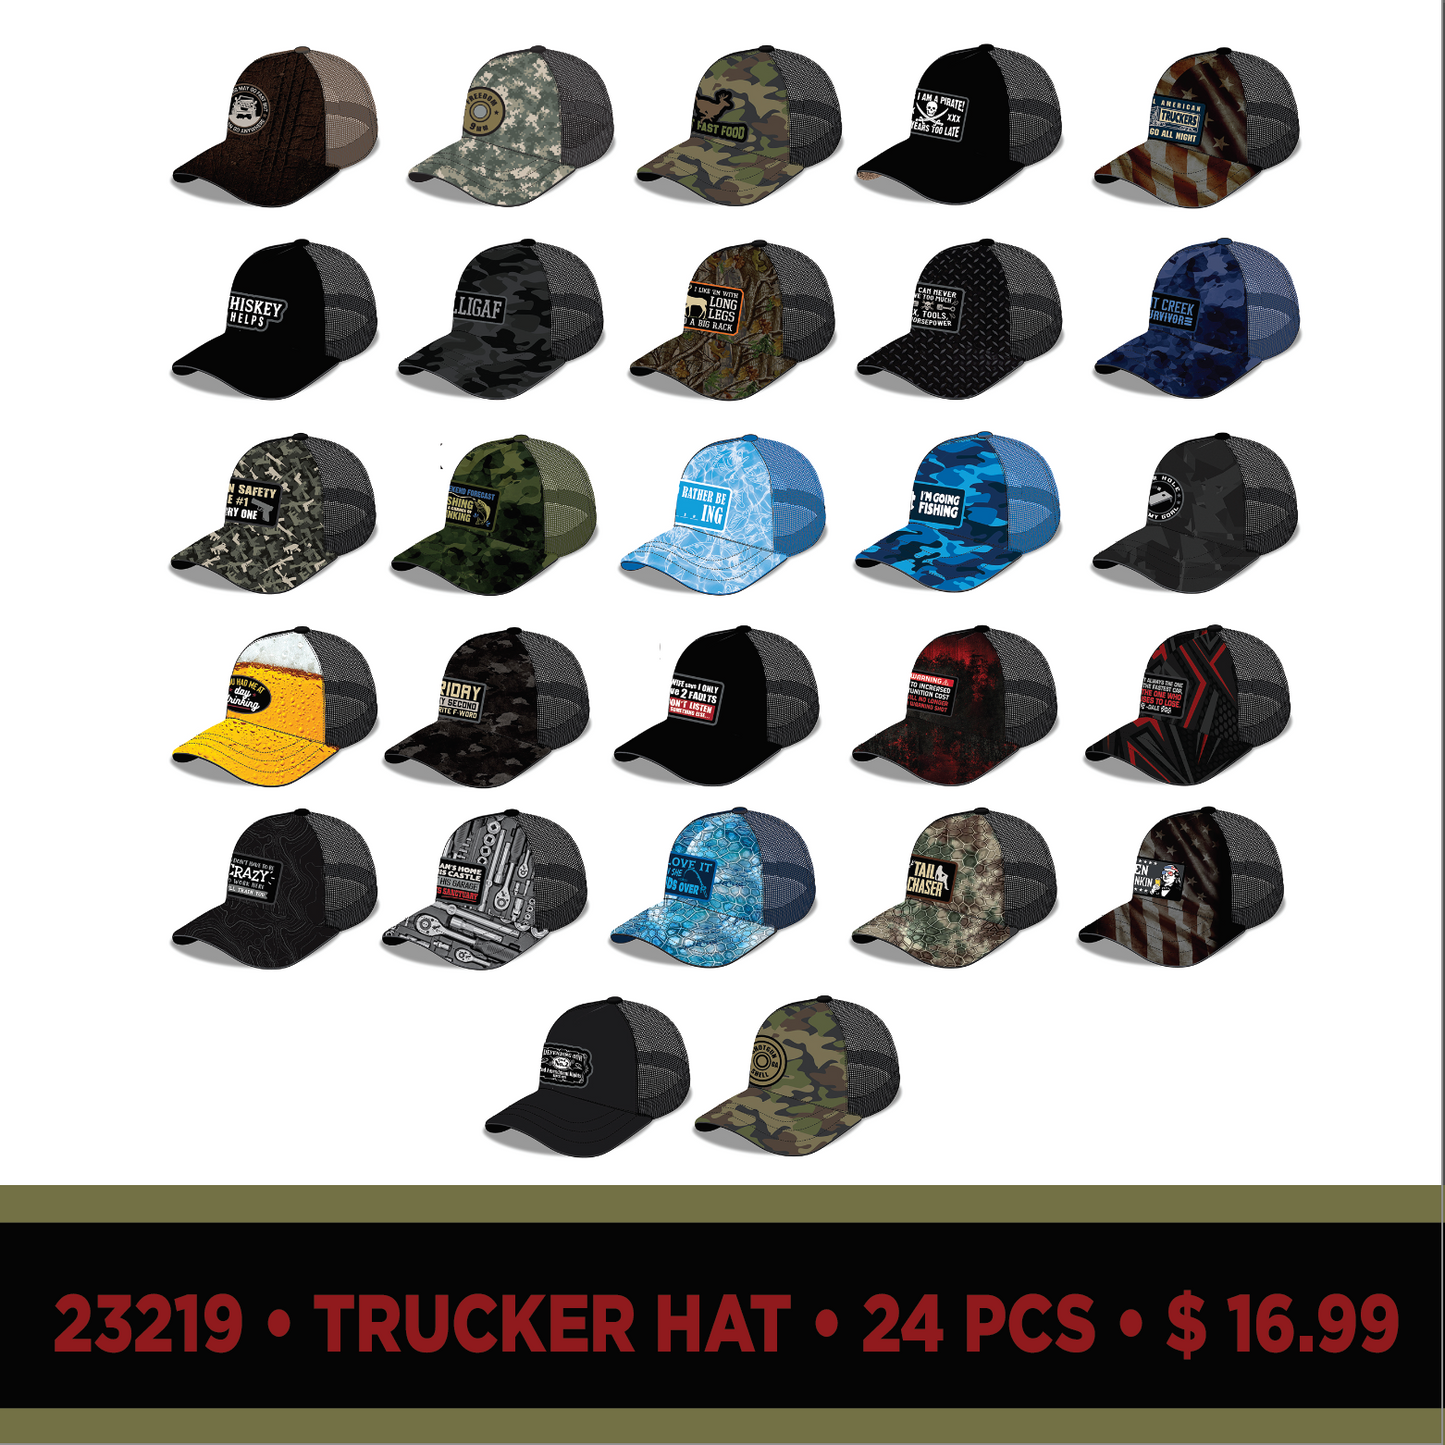 ITEM NUMBER 023219L TRUCKER HAT W PATCH - STORE SURPLUS NO DISPLAY 24 PIECES PER PACK